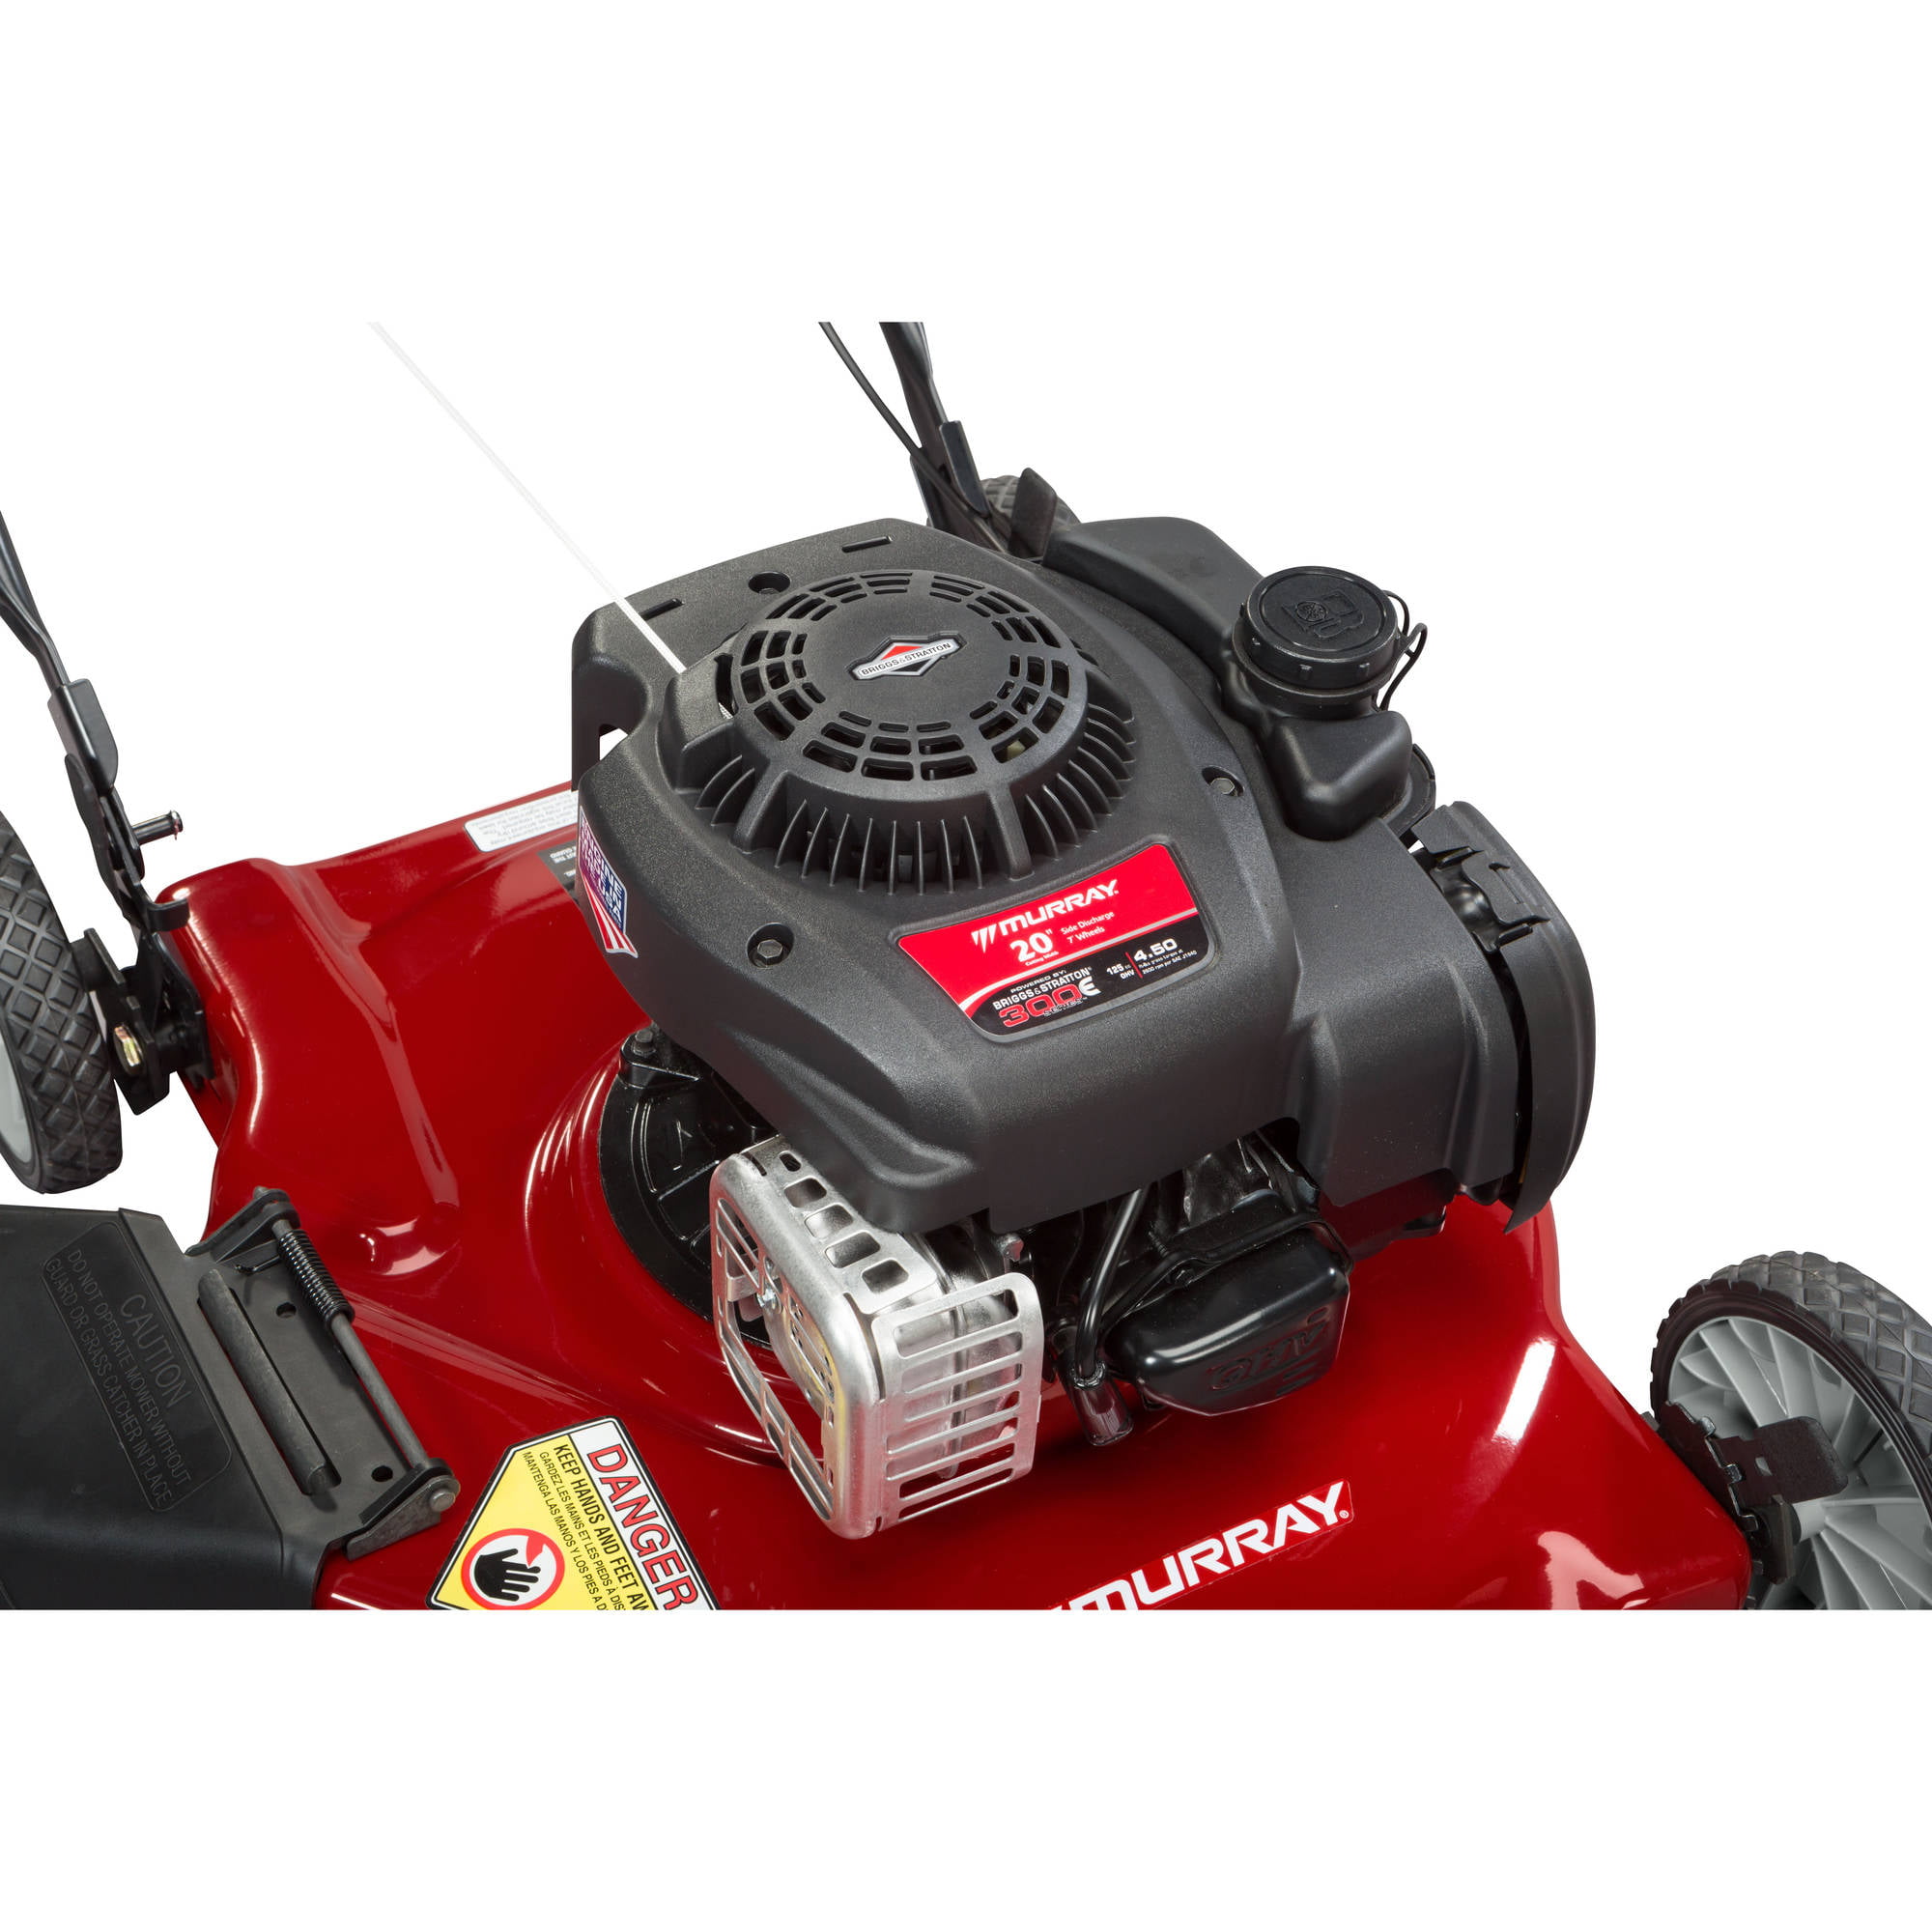 Can You Use Regular Motor Oil In A Lawn Mower impremedia